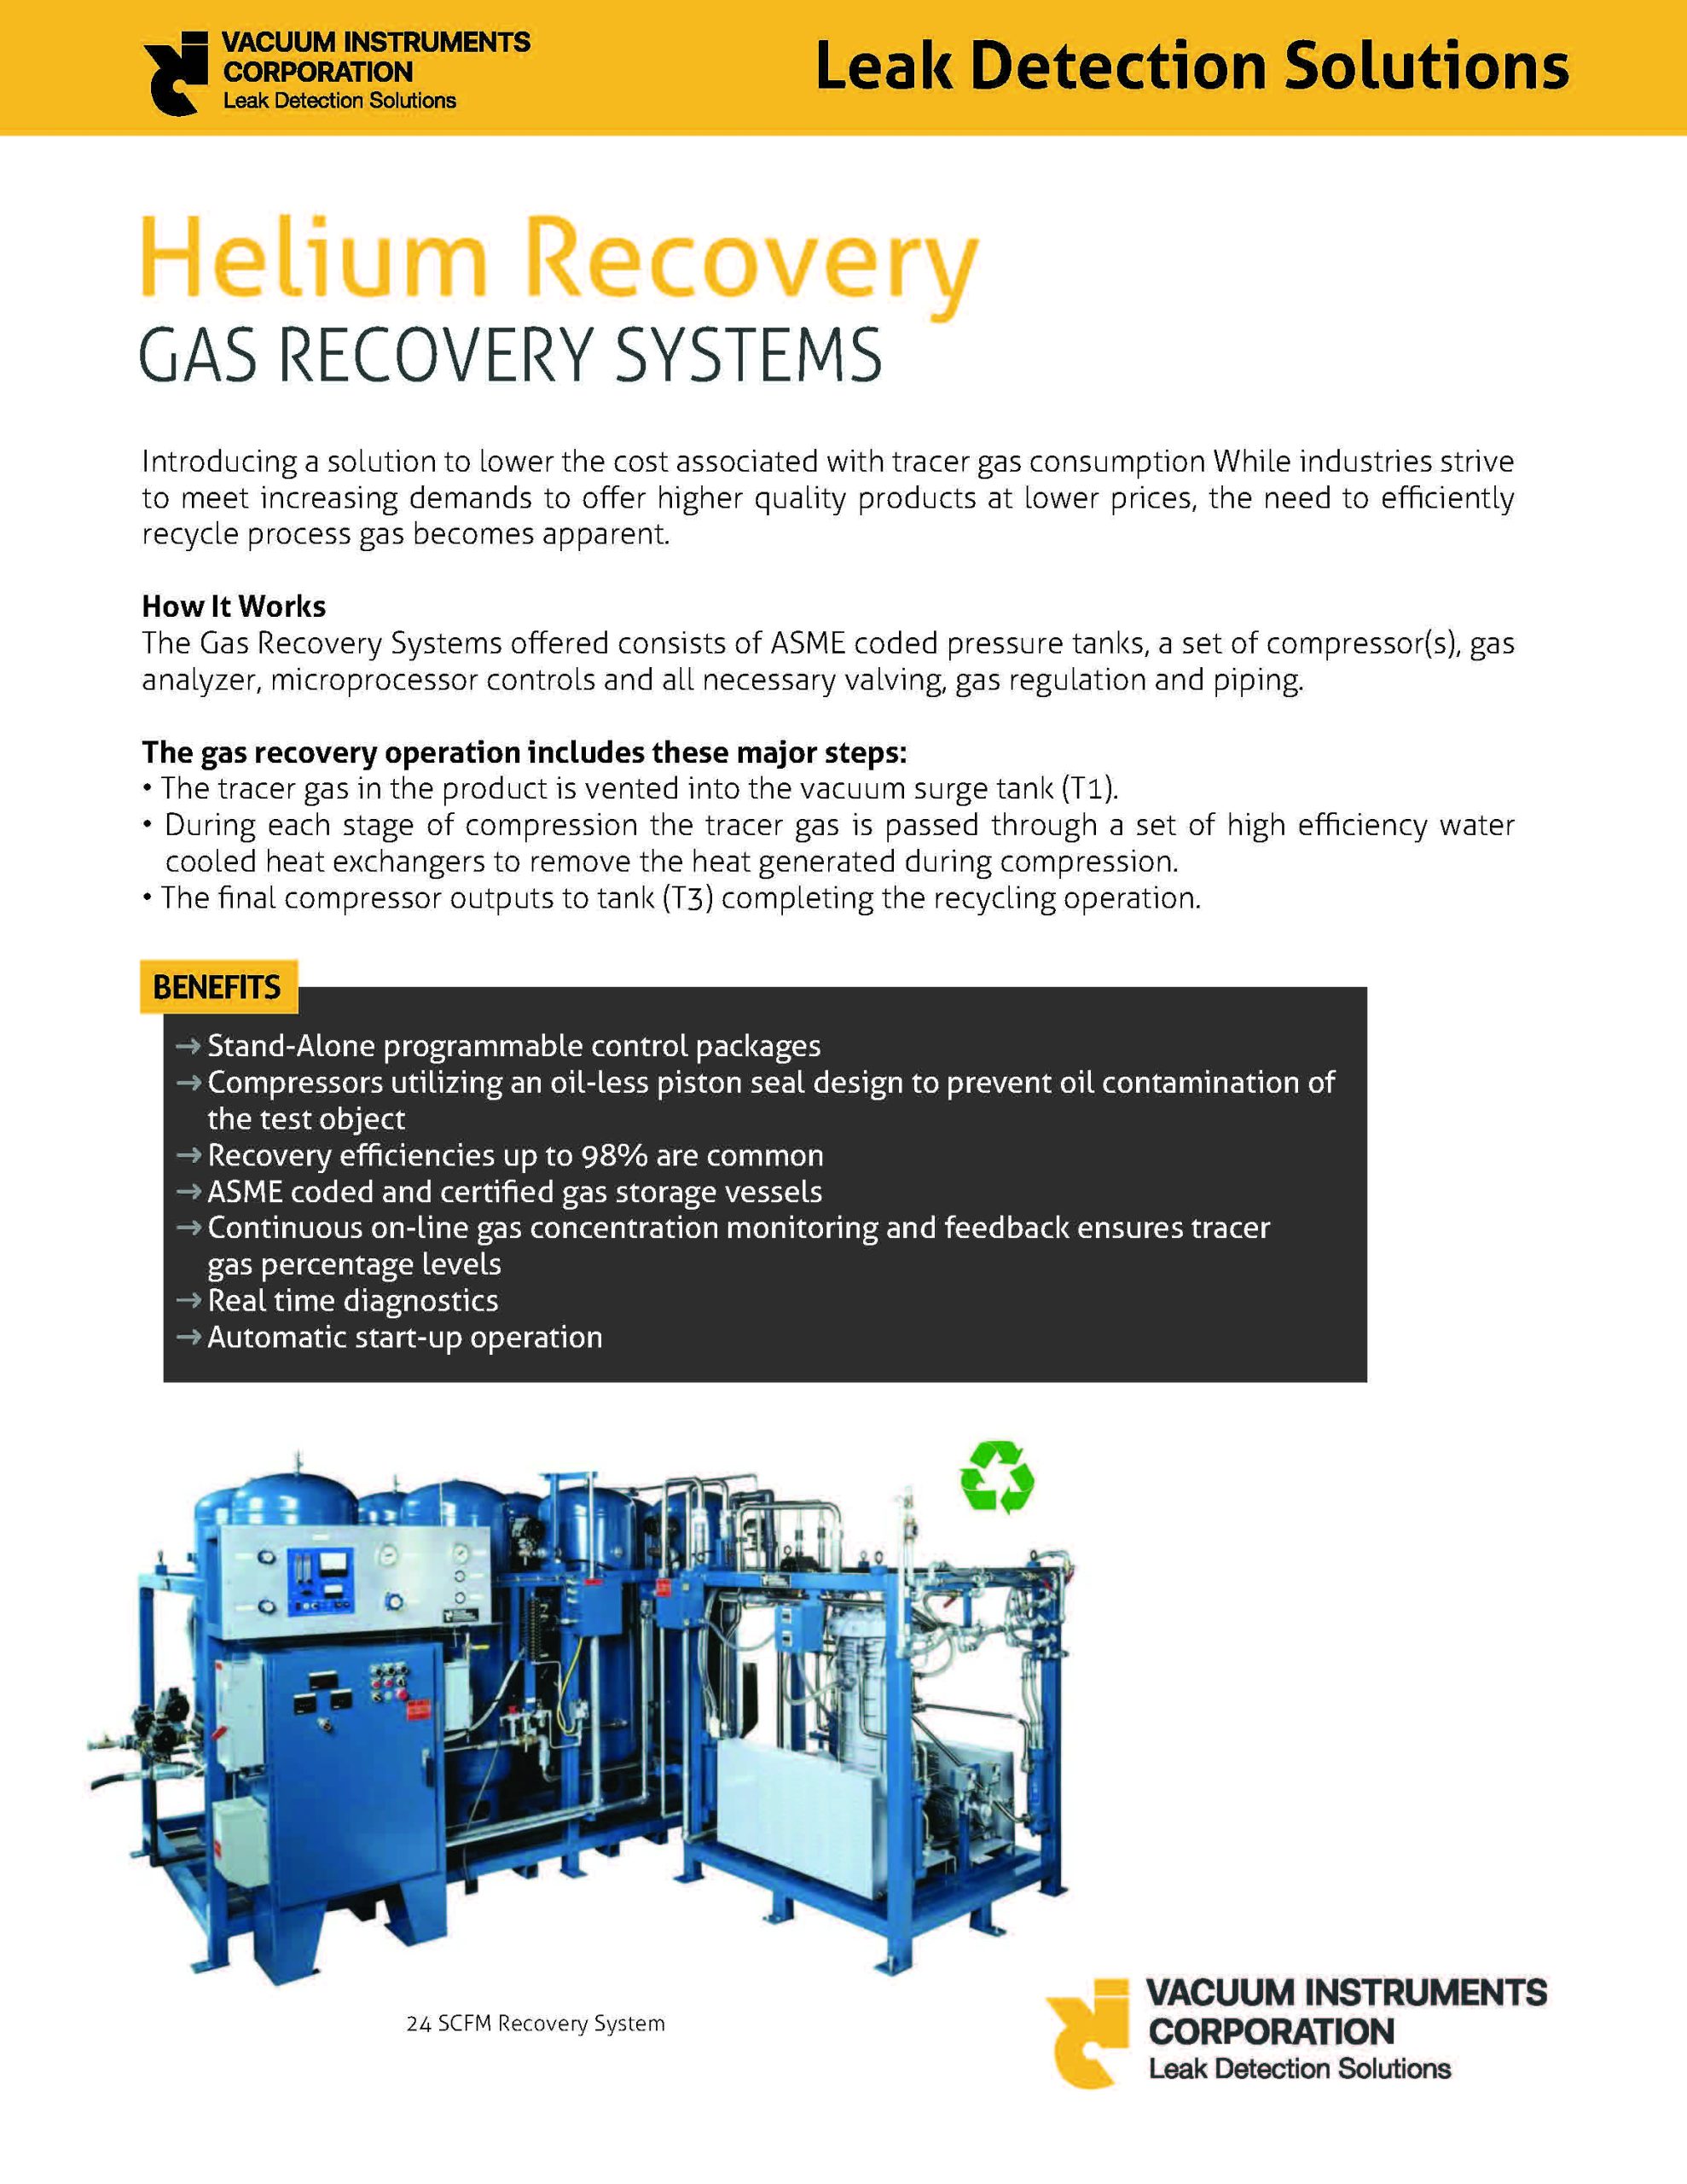 VIC_Helium-Gas-Recovery_EN